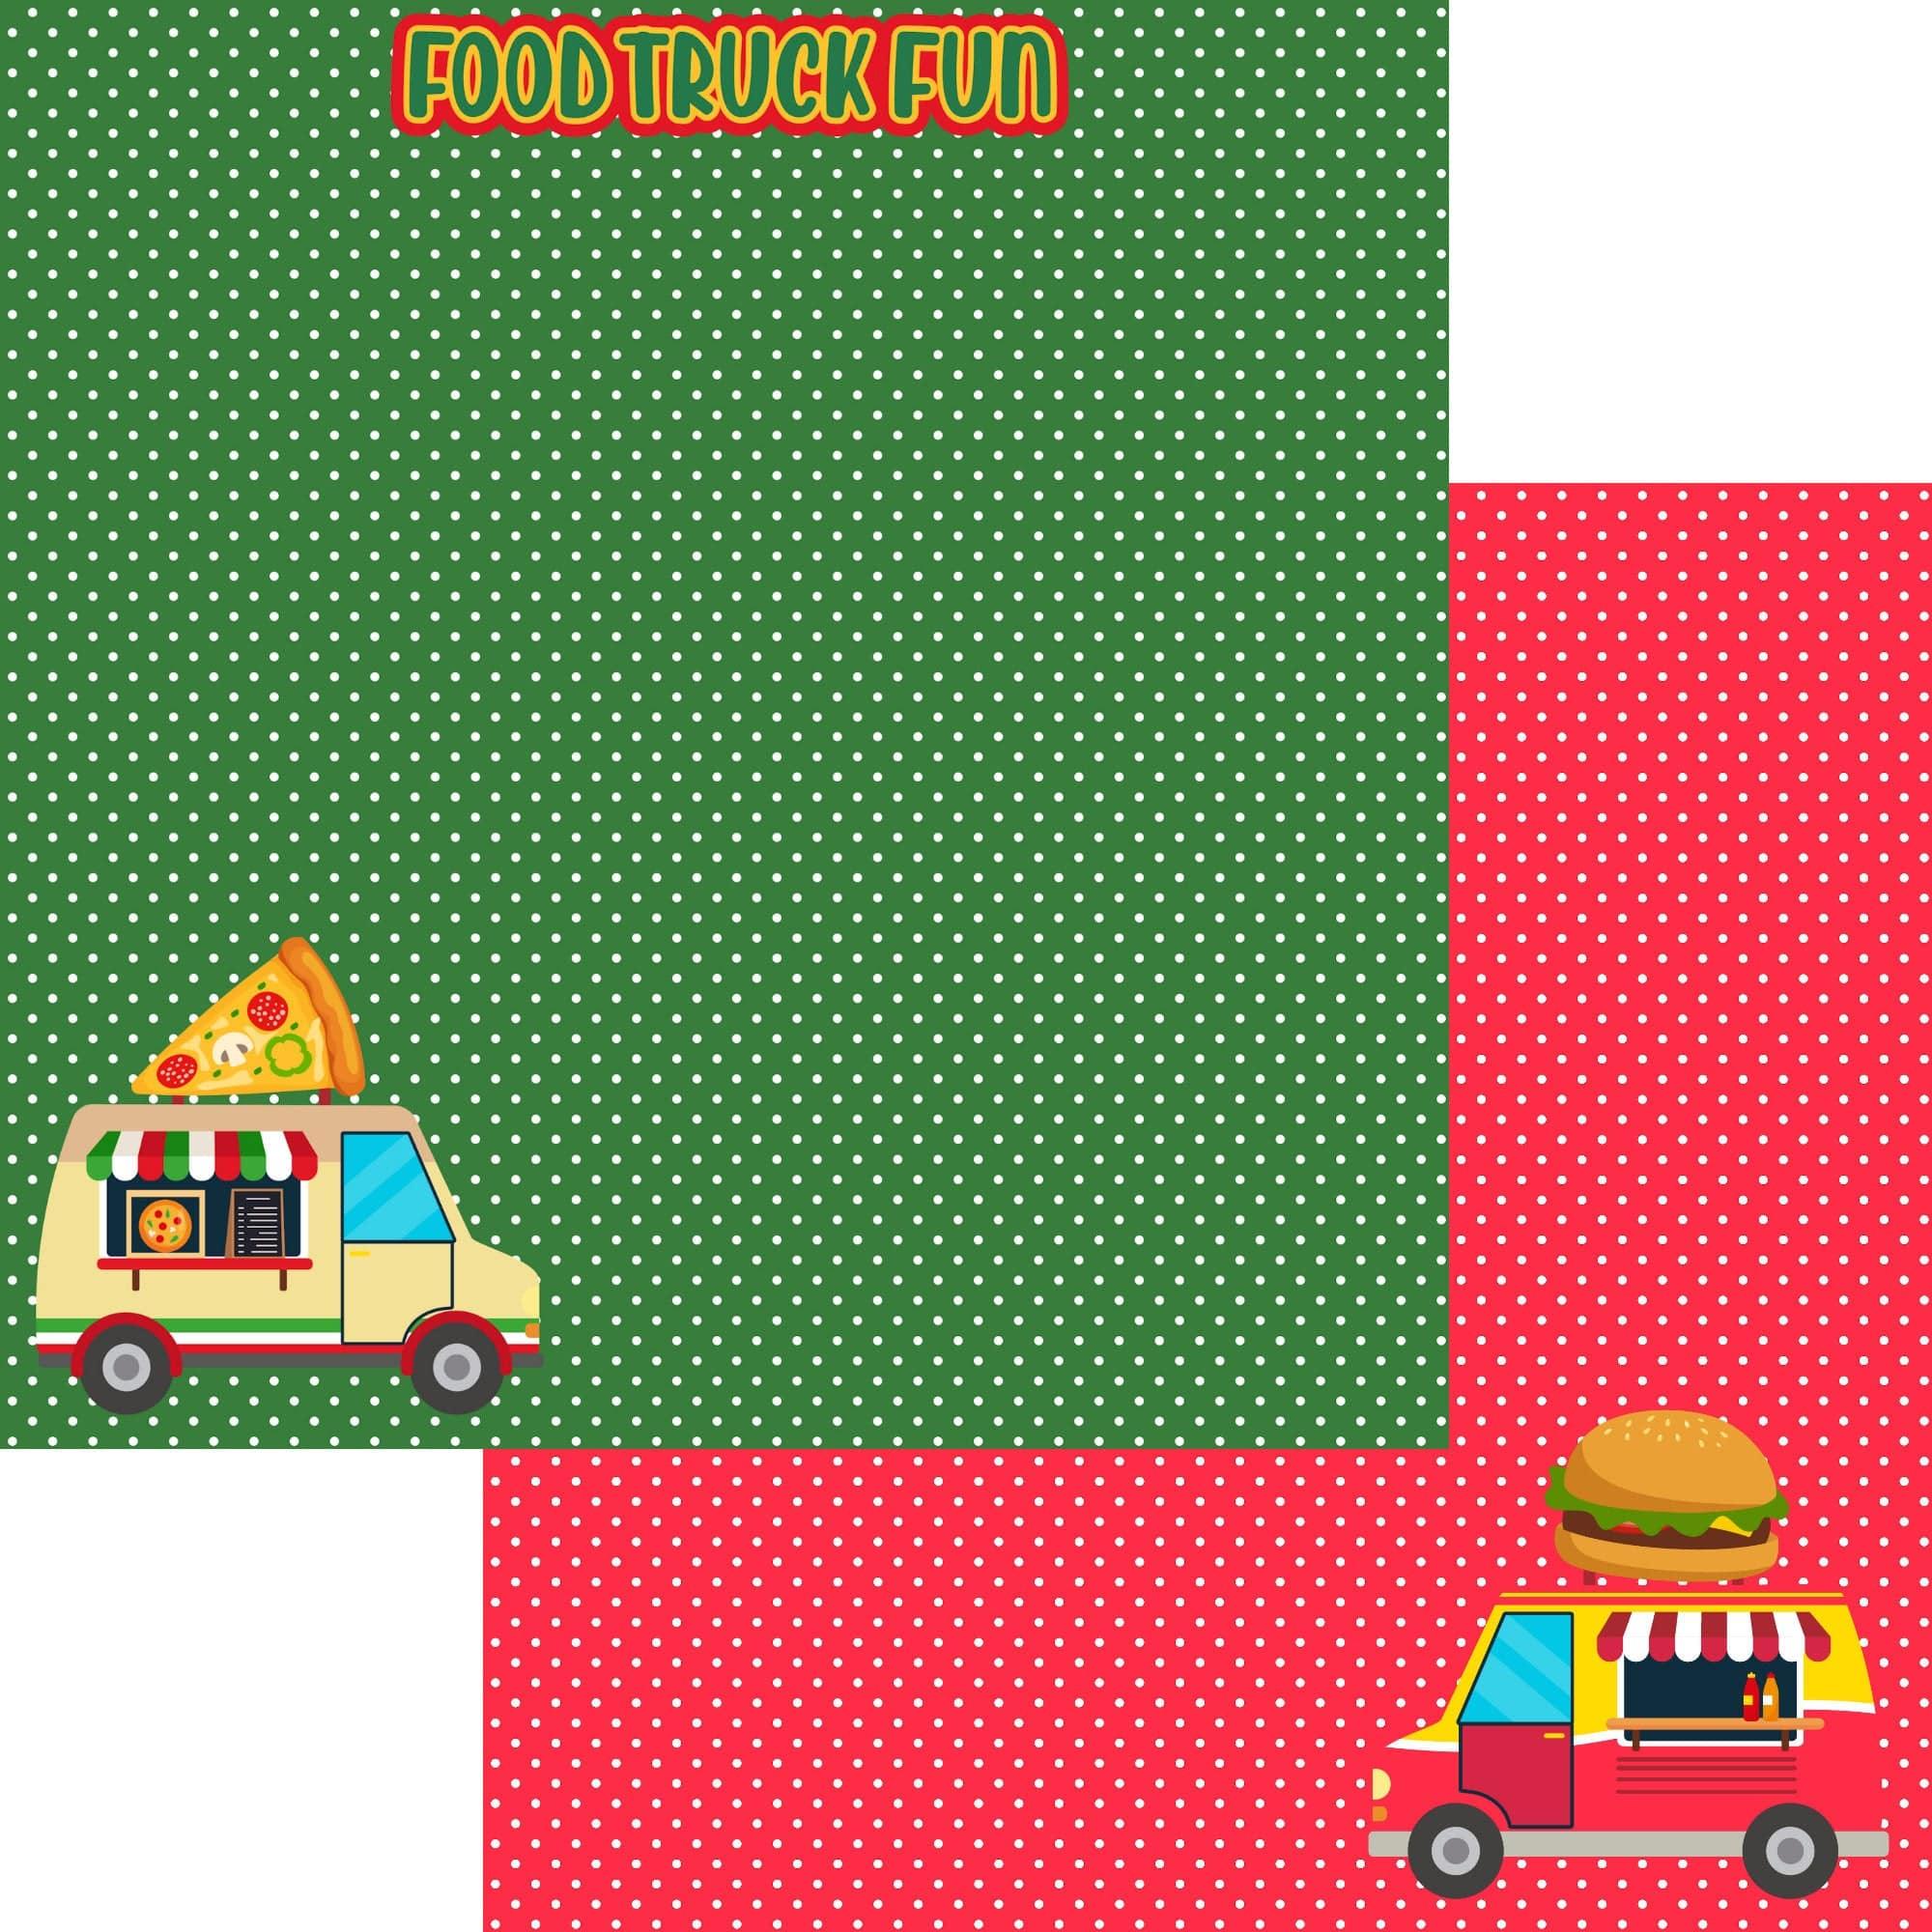 Just Fun Collection Food Truck Fun 12 x 12 Double-Sided Scrapbook Paper by SSC Designs